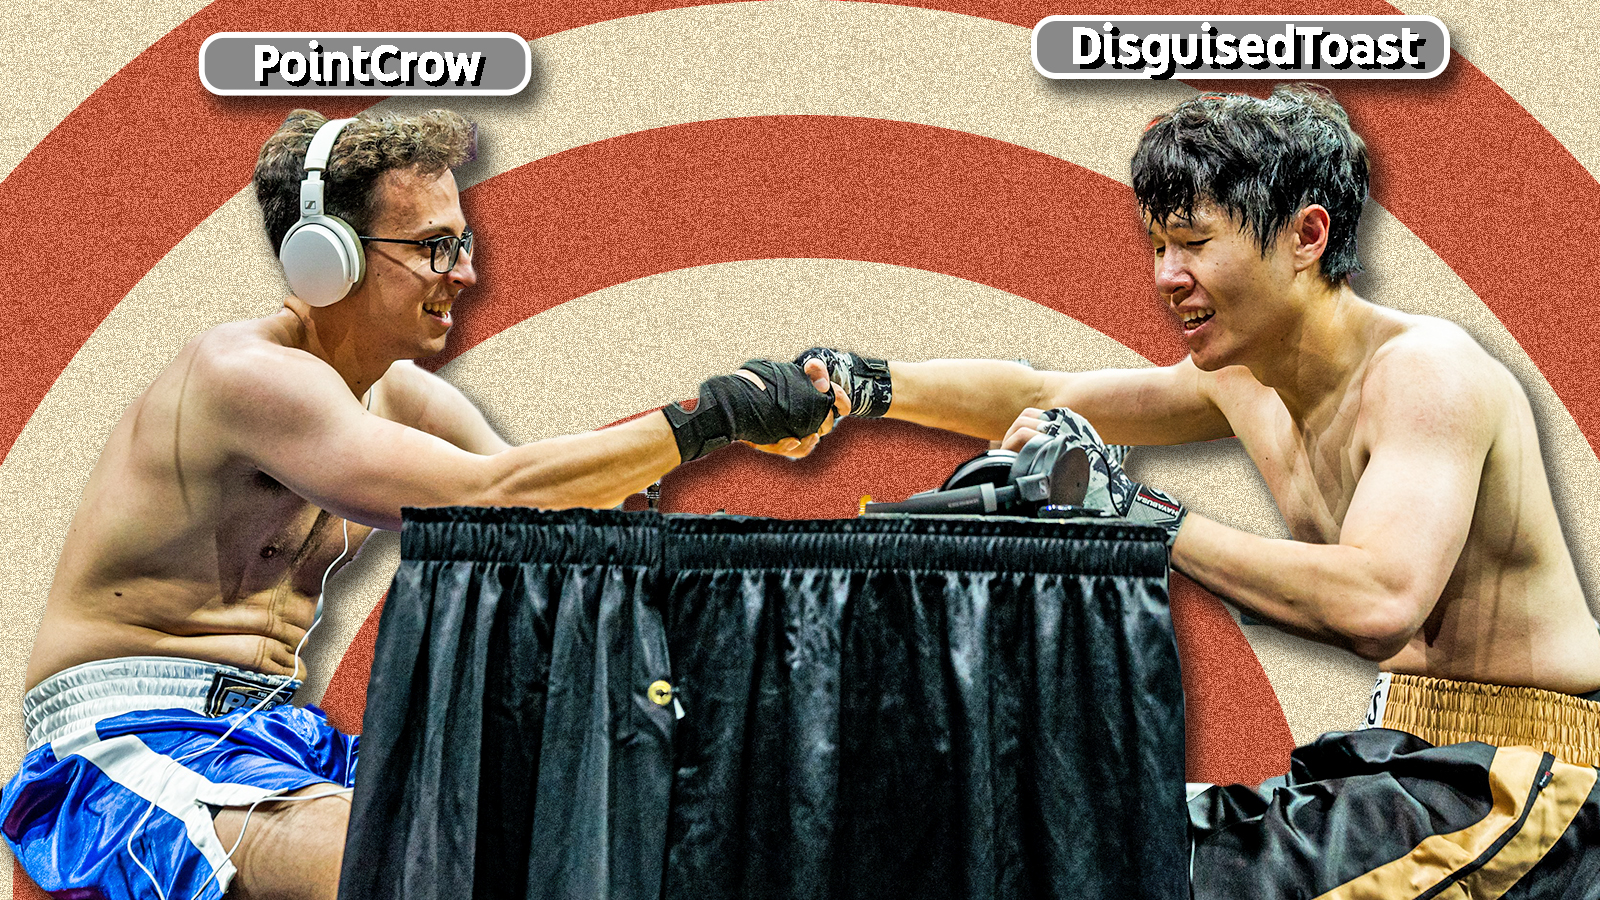 PointCrow details stepping into the ring with his greatest inspiration, DisguisedToast